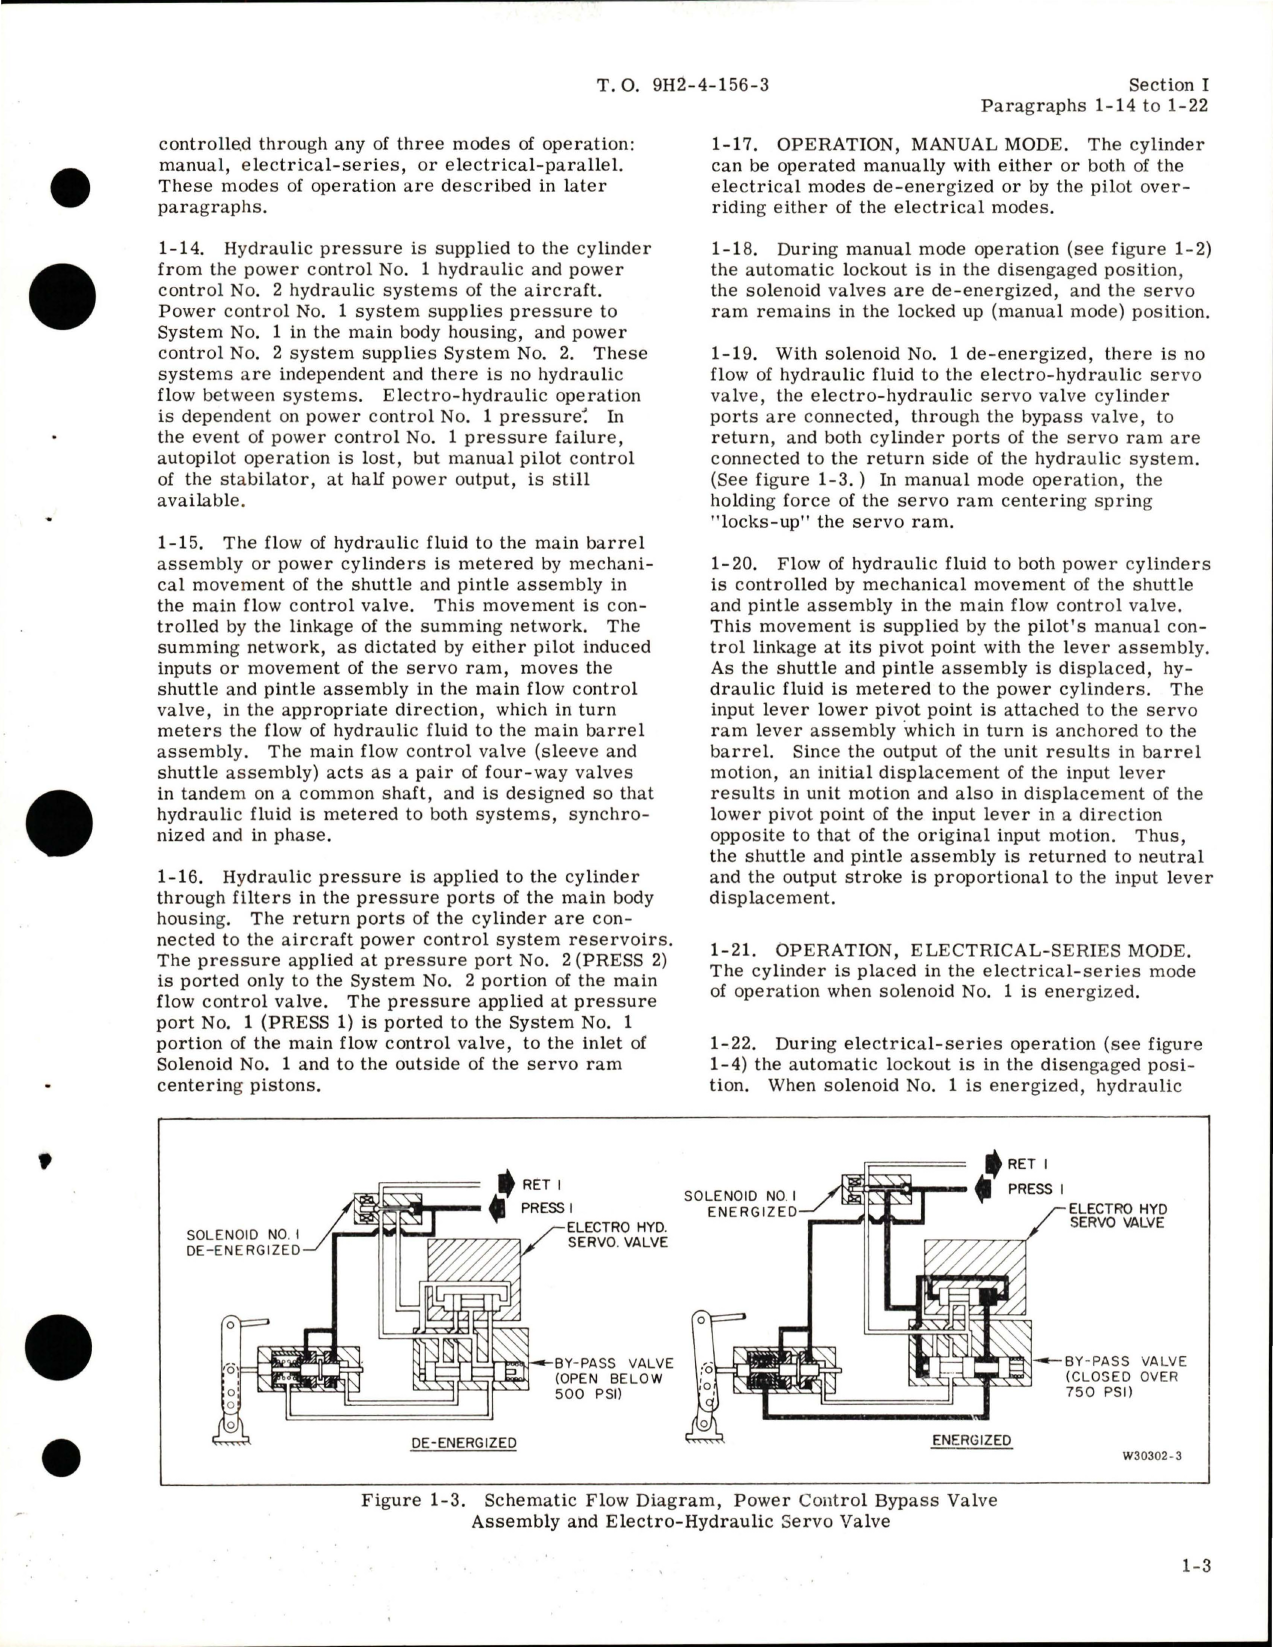 Sample page 7 from AirCorps Library document: Overhaul Instructions for Electro-Hydraulic Tandem Power Control Cylinder - Part 22930 and 22930-1